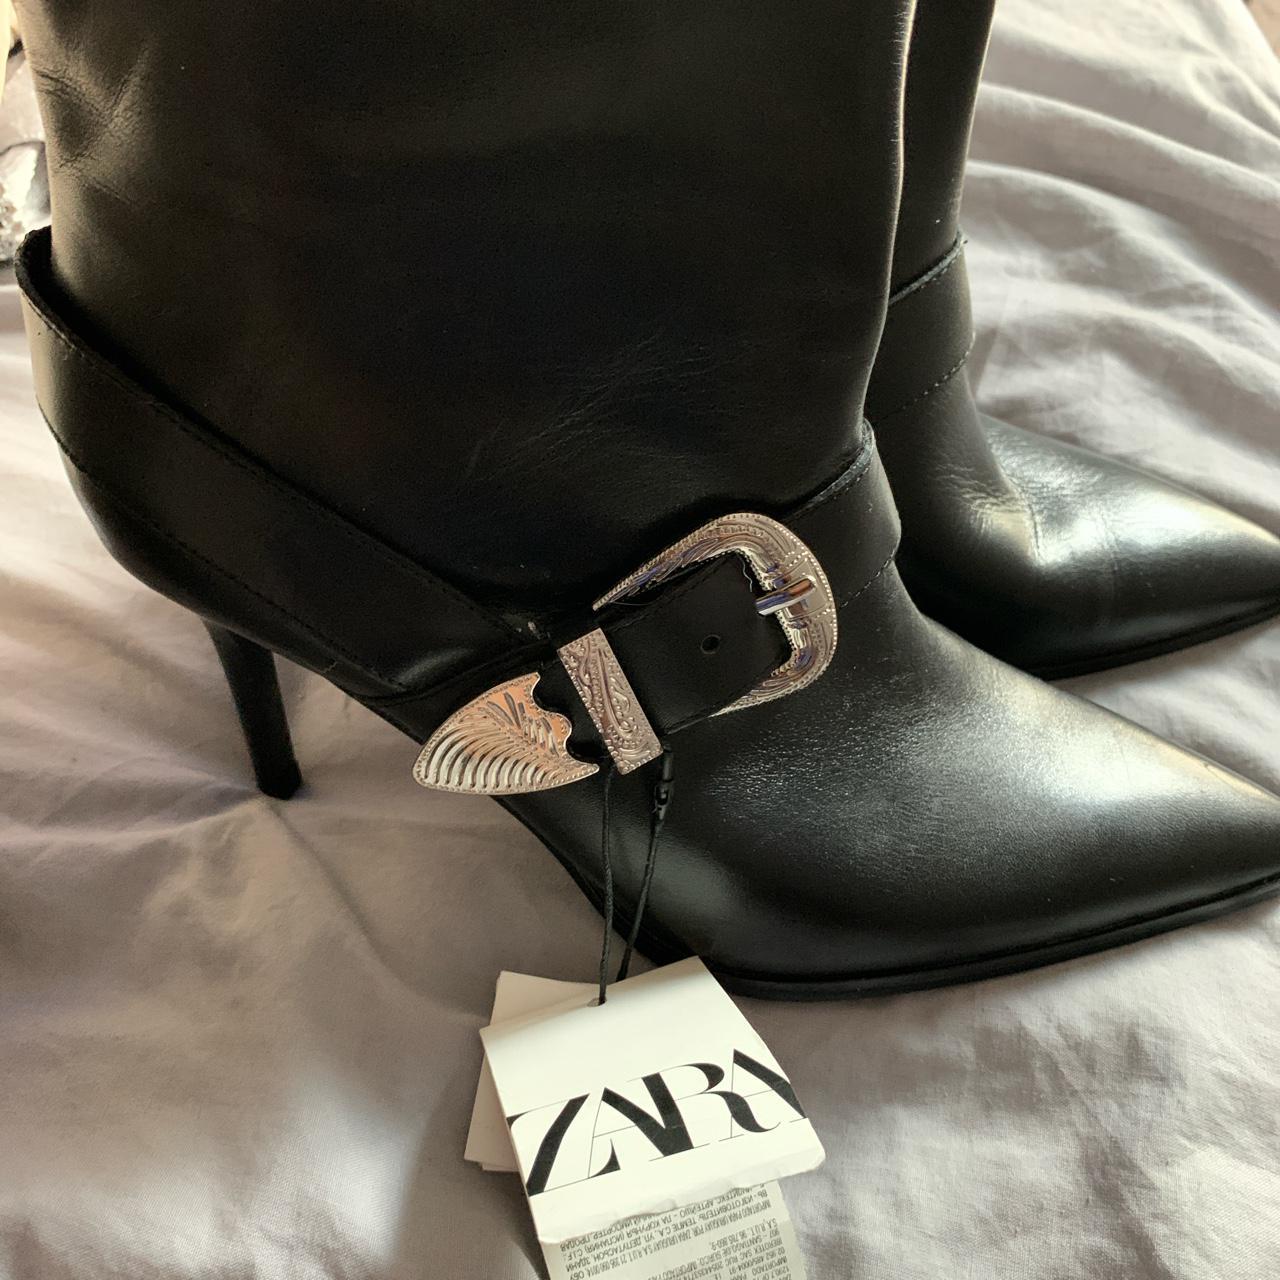 Zara black leather heeled boots with cowboy Buckle - Depop